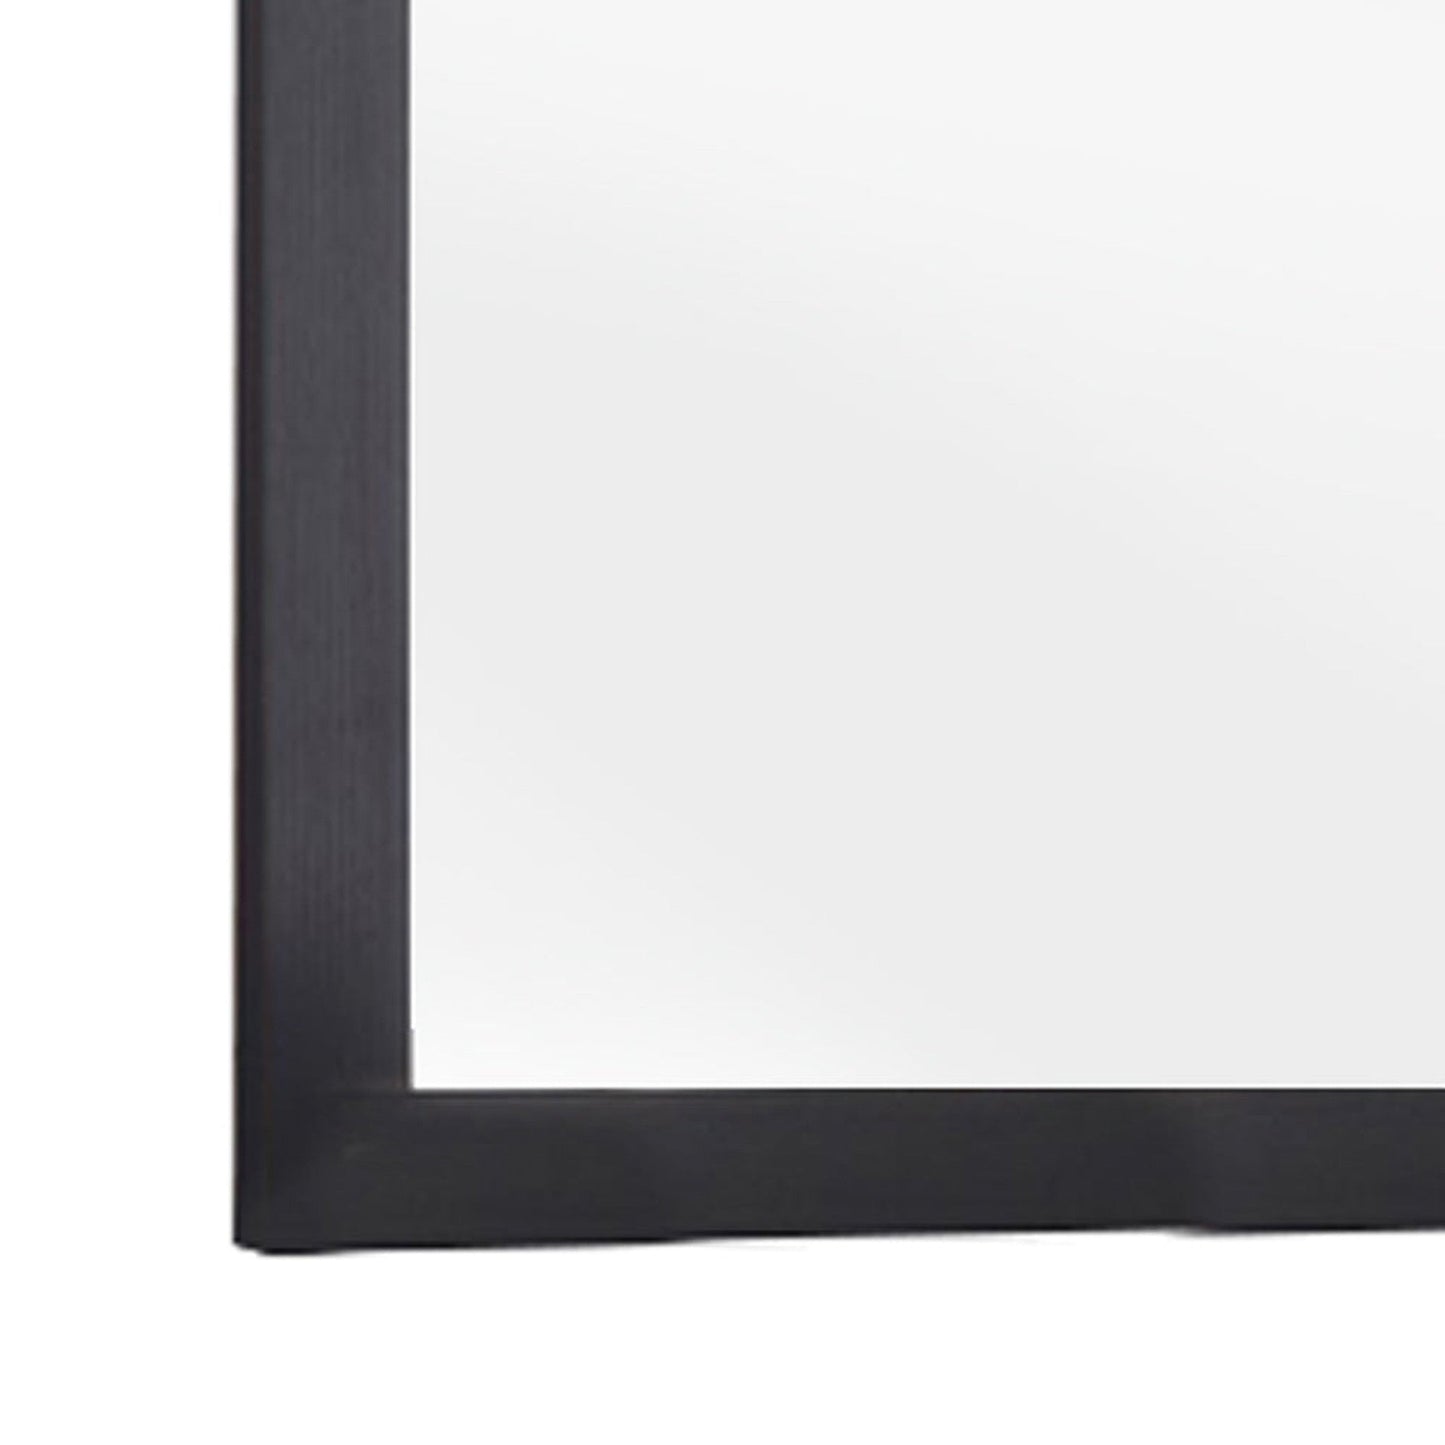 Benzara Black and Silver Transitional Style Rectangular Mirror With Wooden Frame